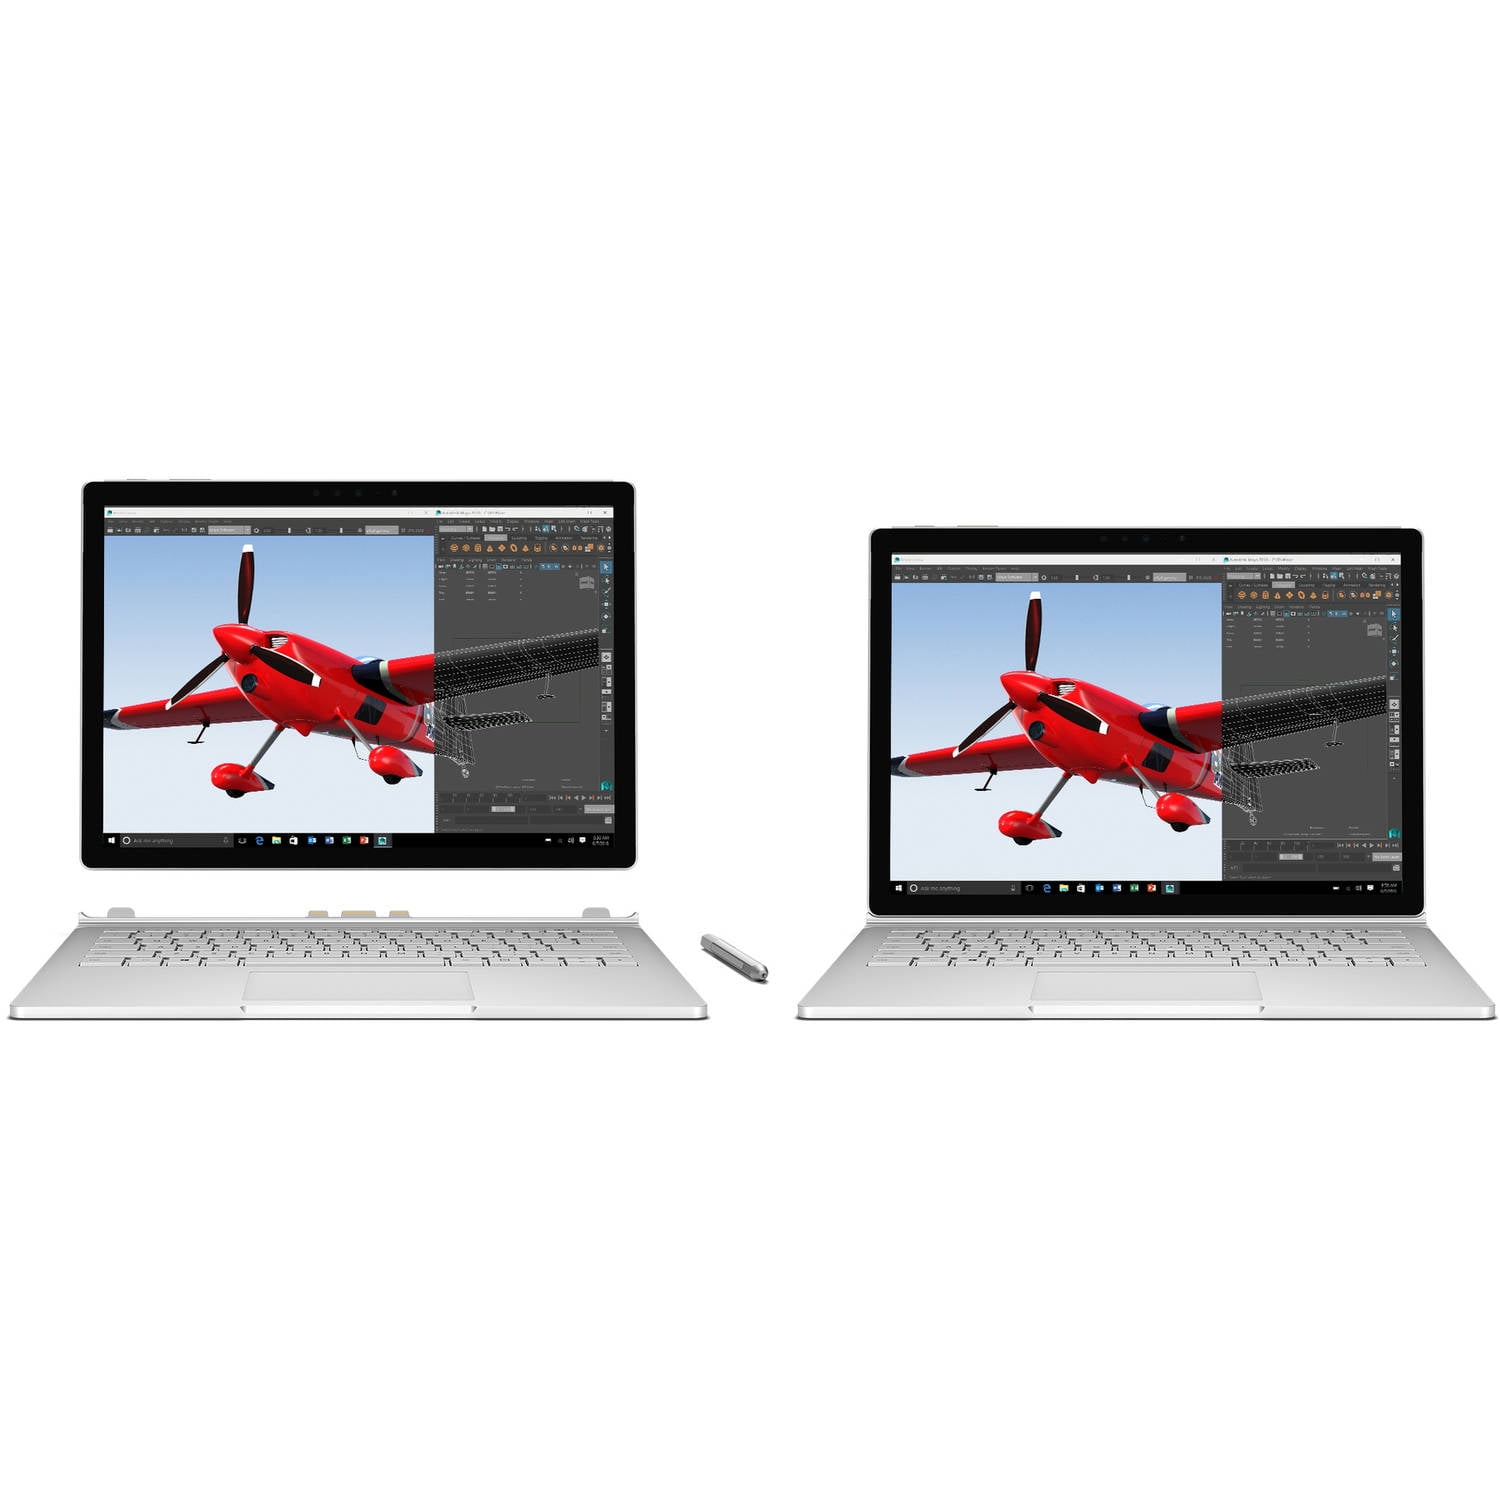 PC/タブレット ノートPC Microsoft Surface Book Laptop 13.5